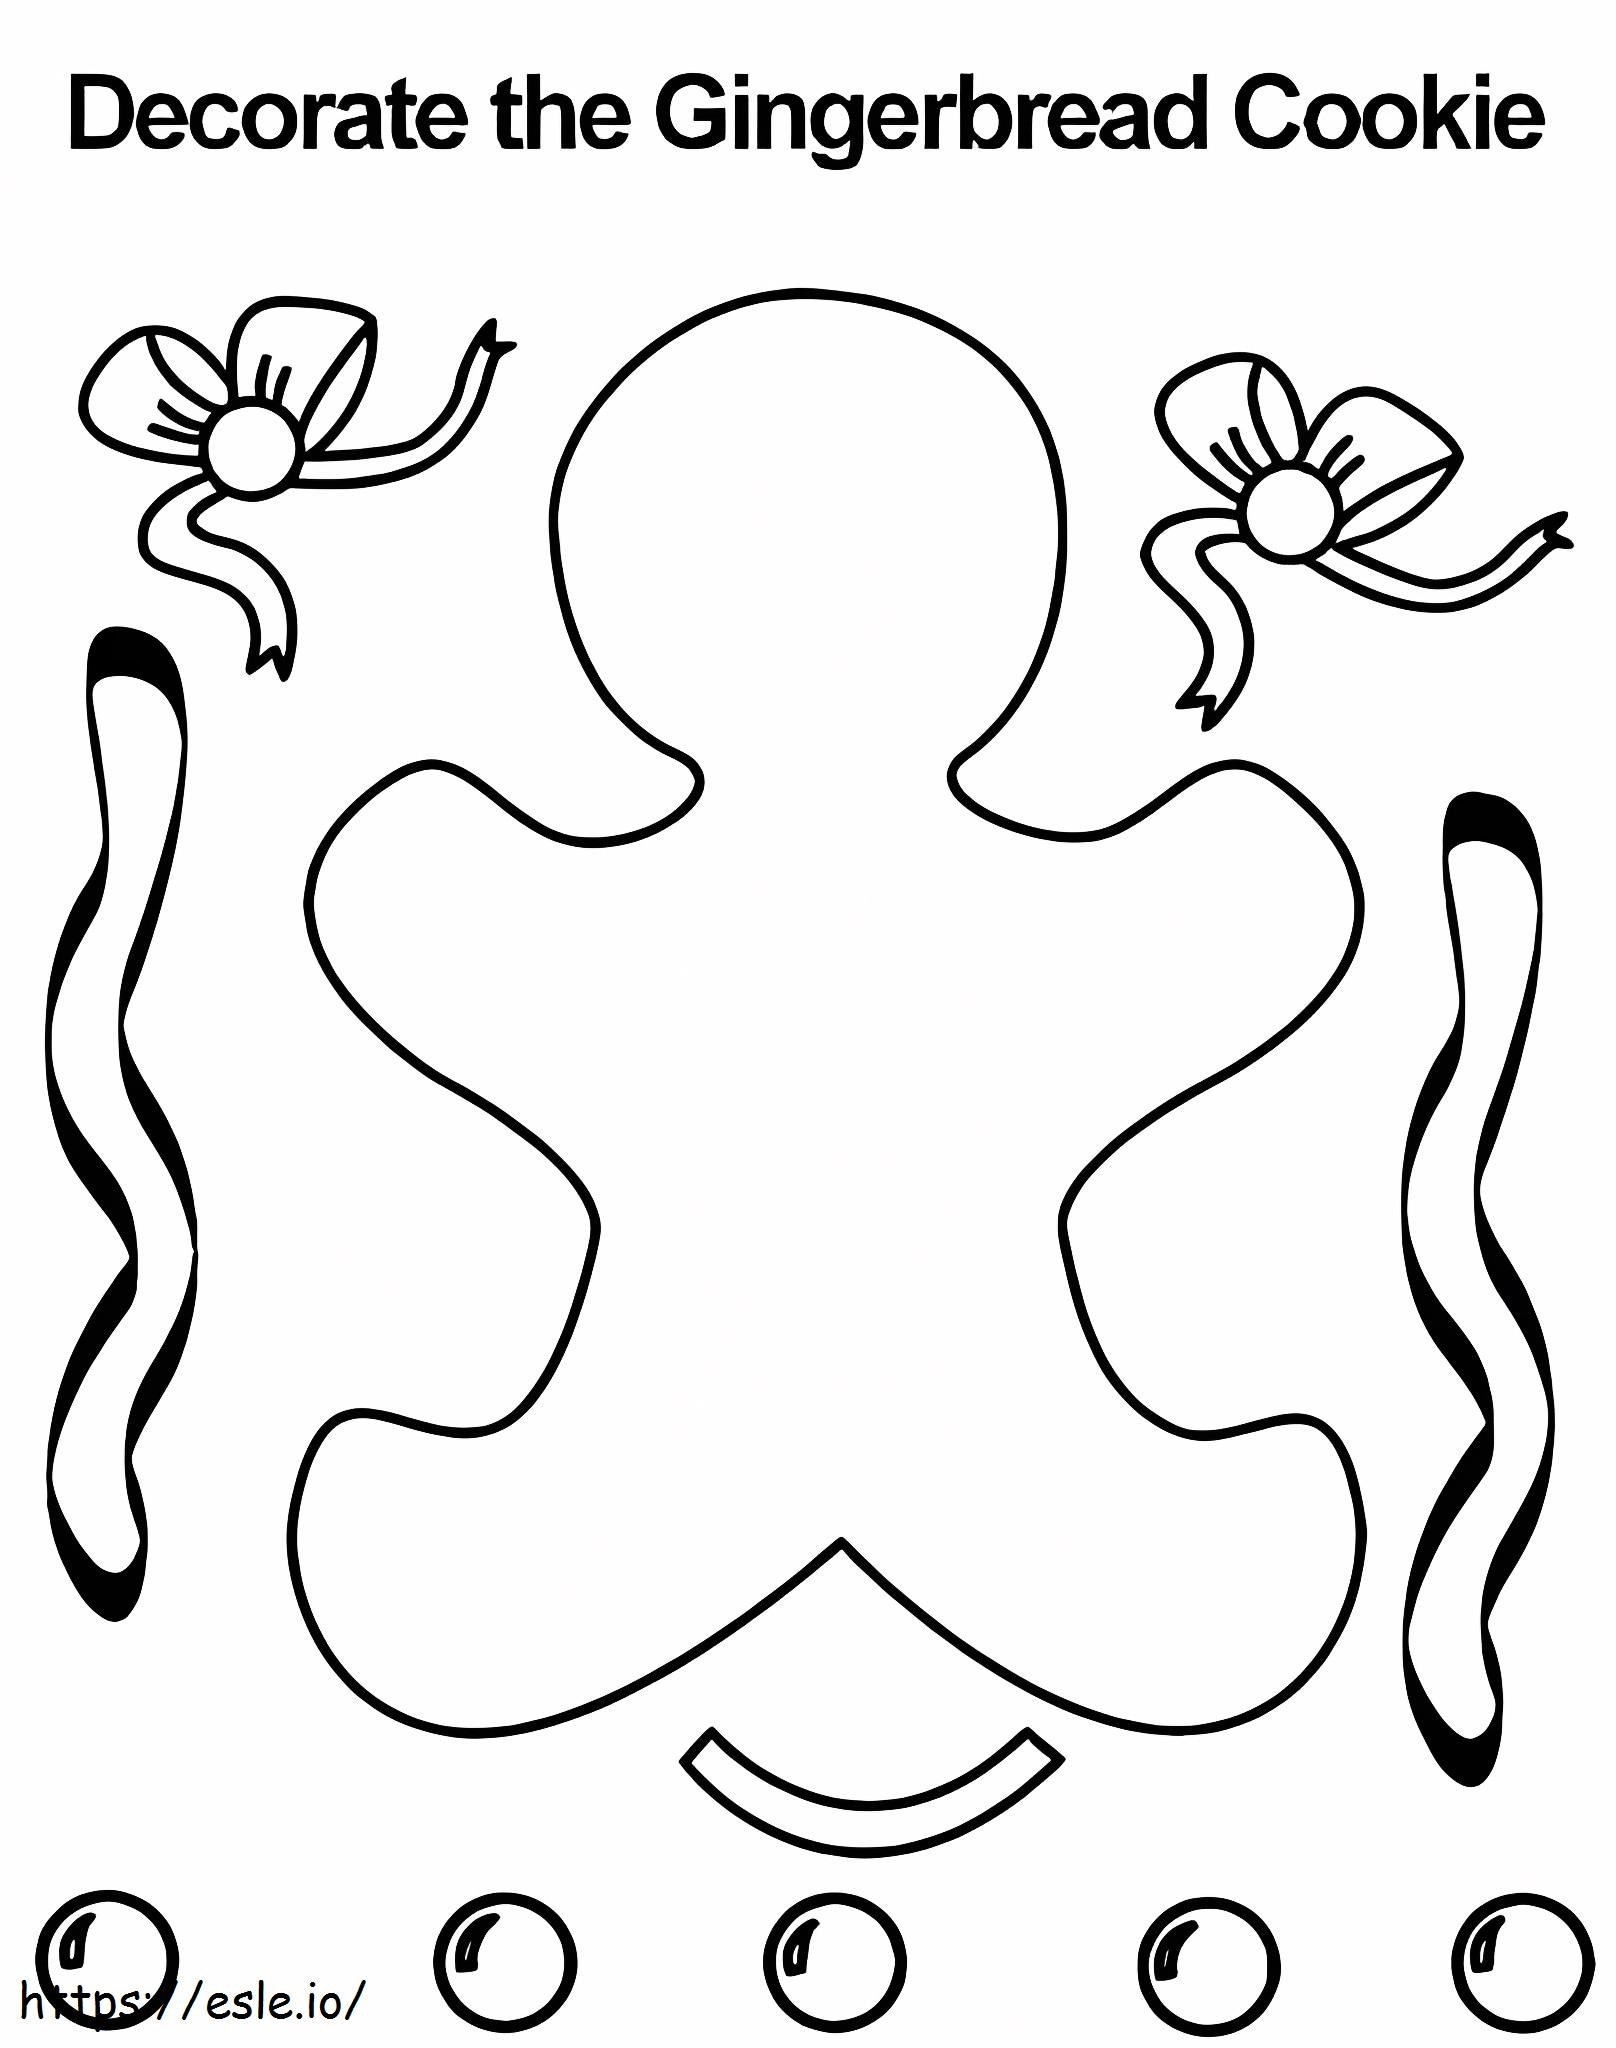 Decorate The Gingerbread Cookie coloring page